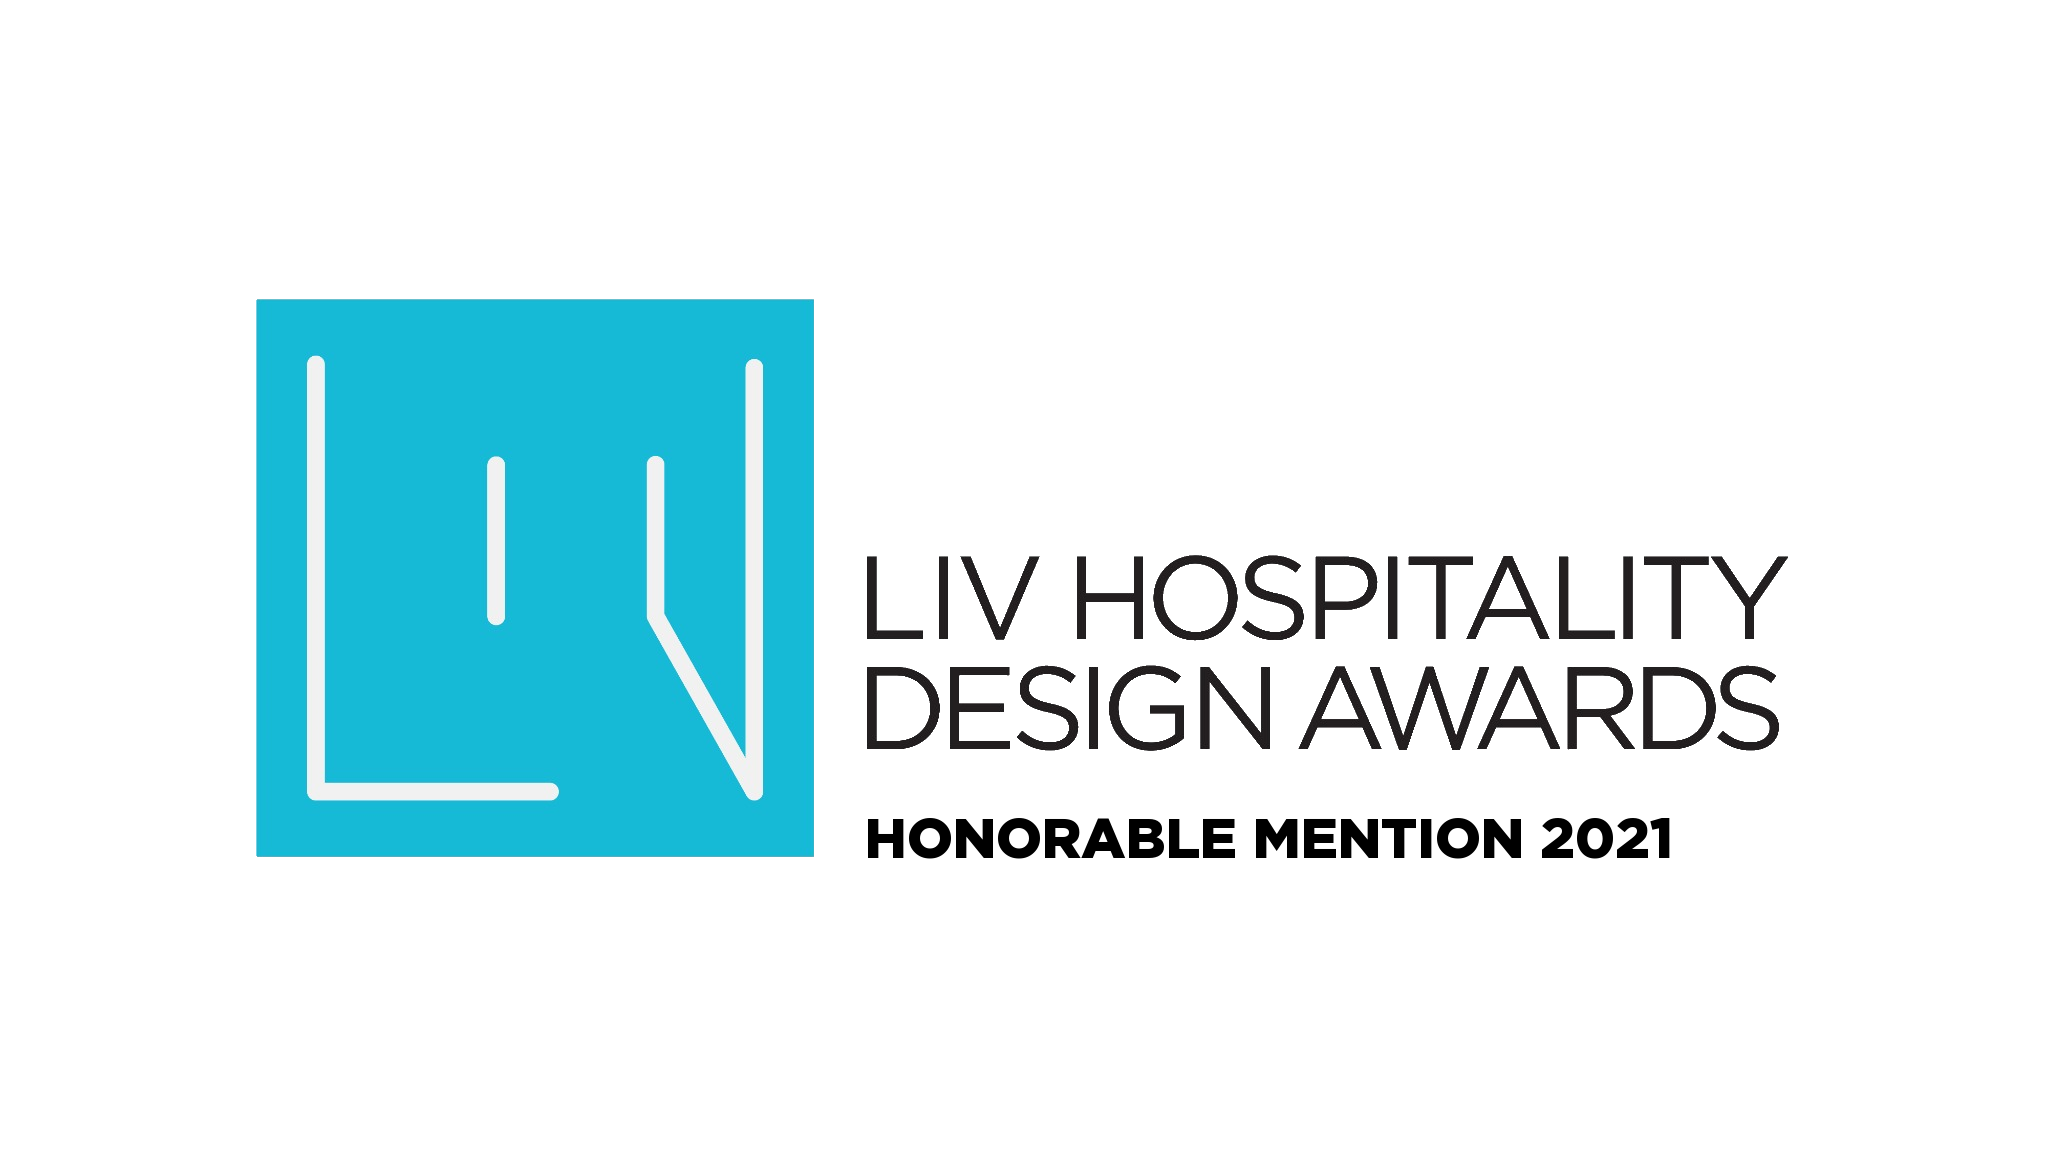 LIV Hospitality Design Awards 2021- Honorable Mention in Interior Design,Living Space